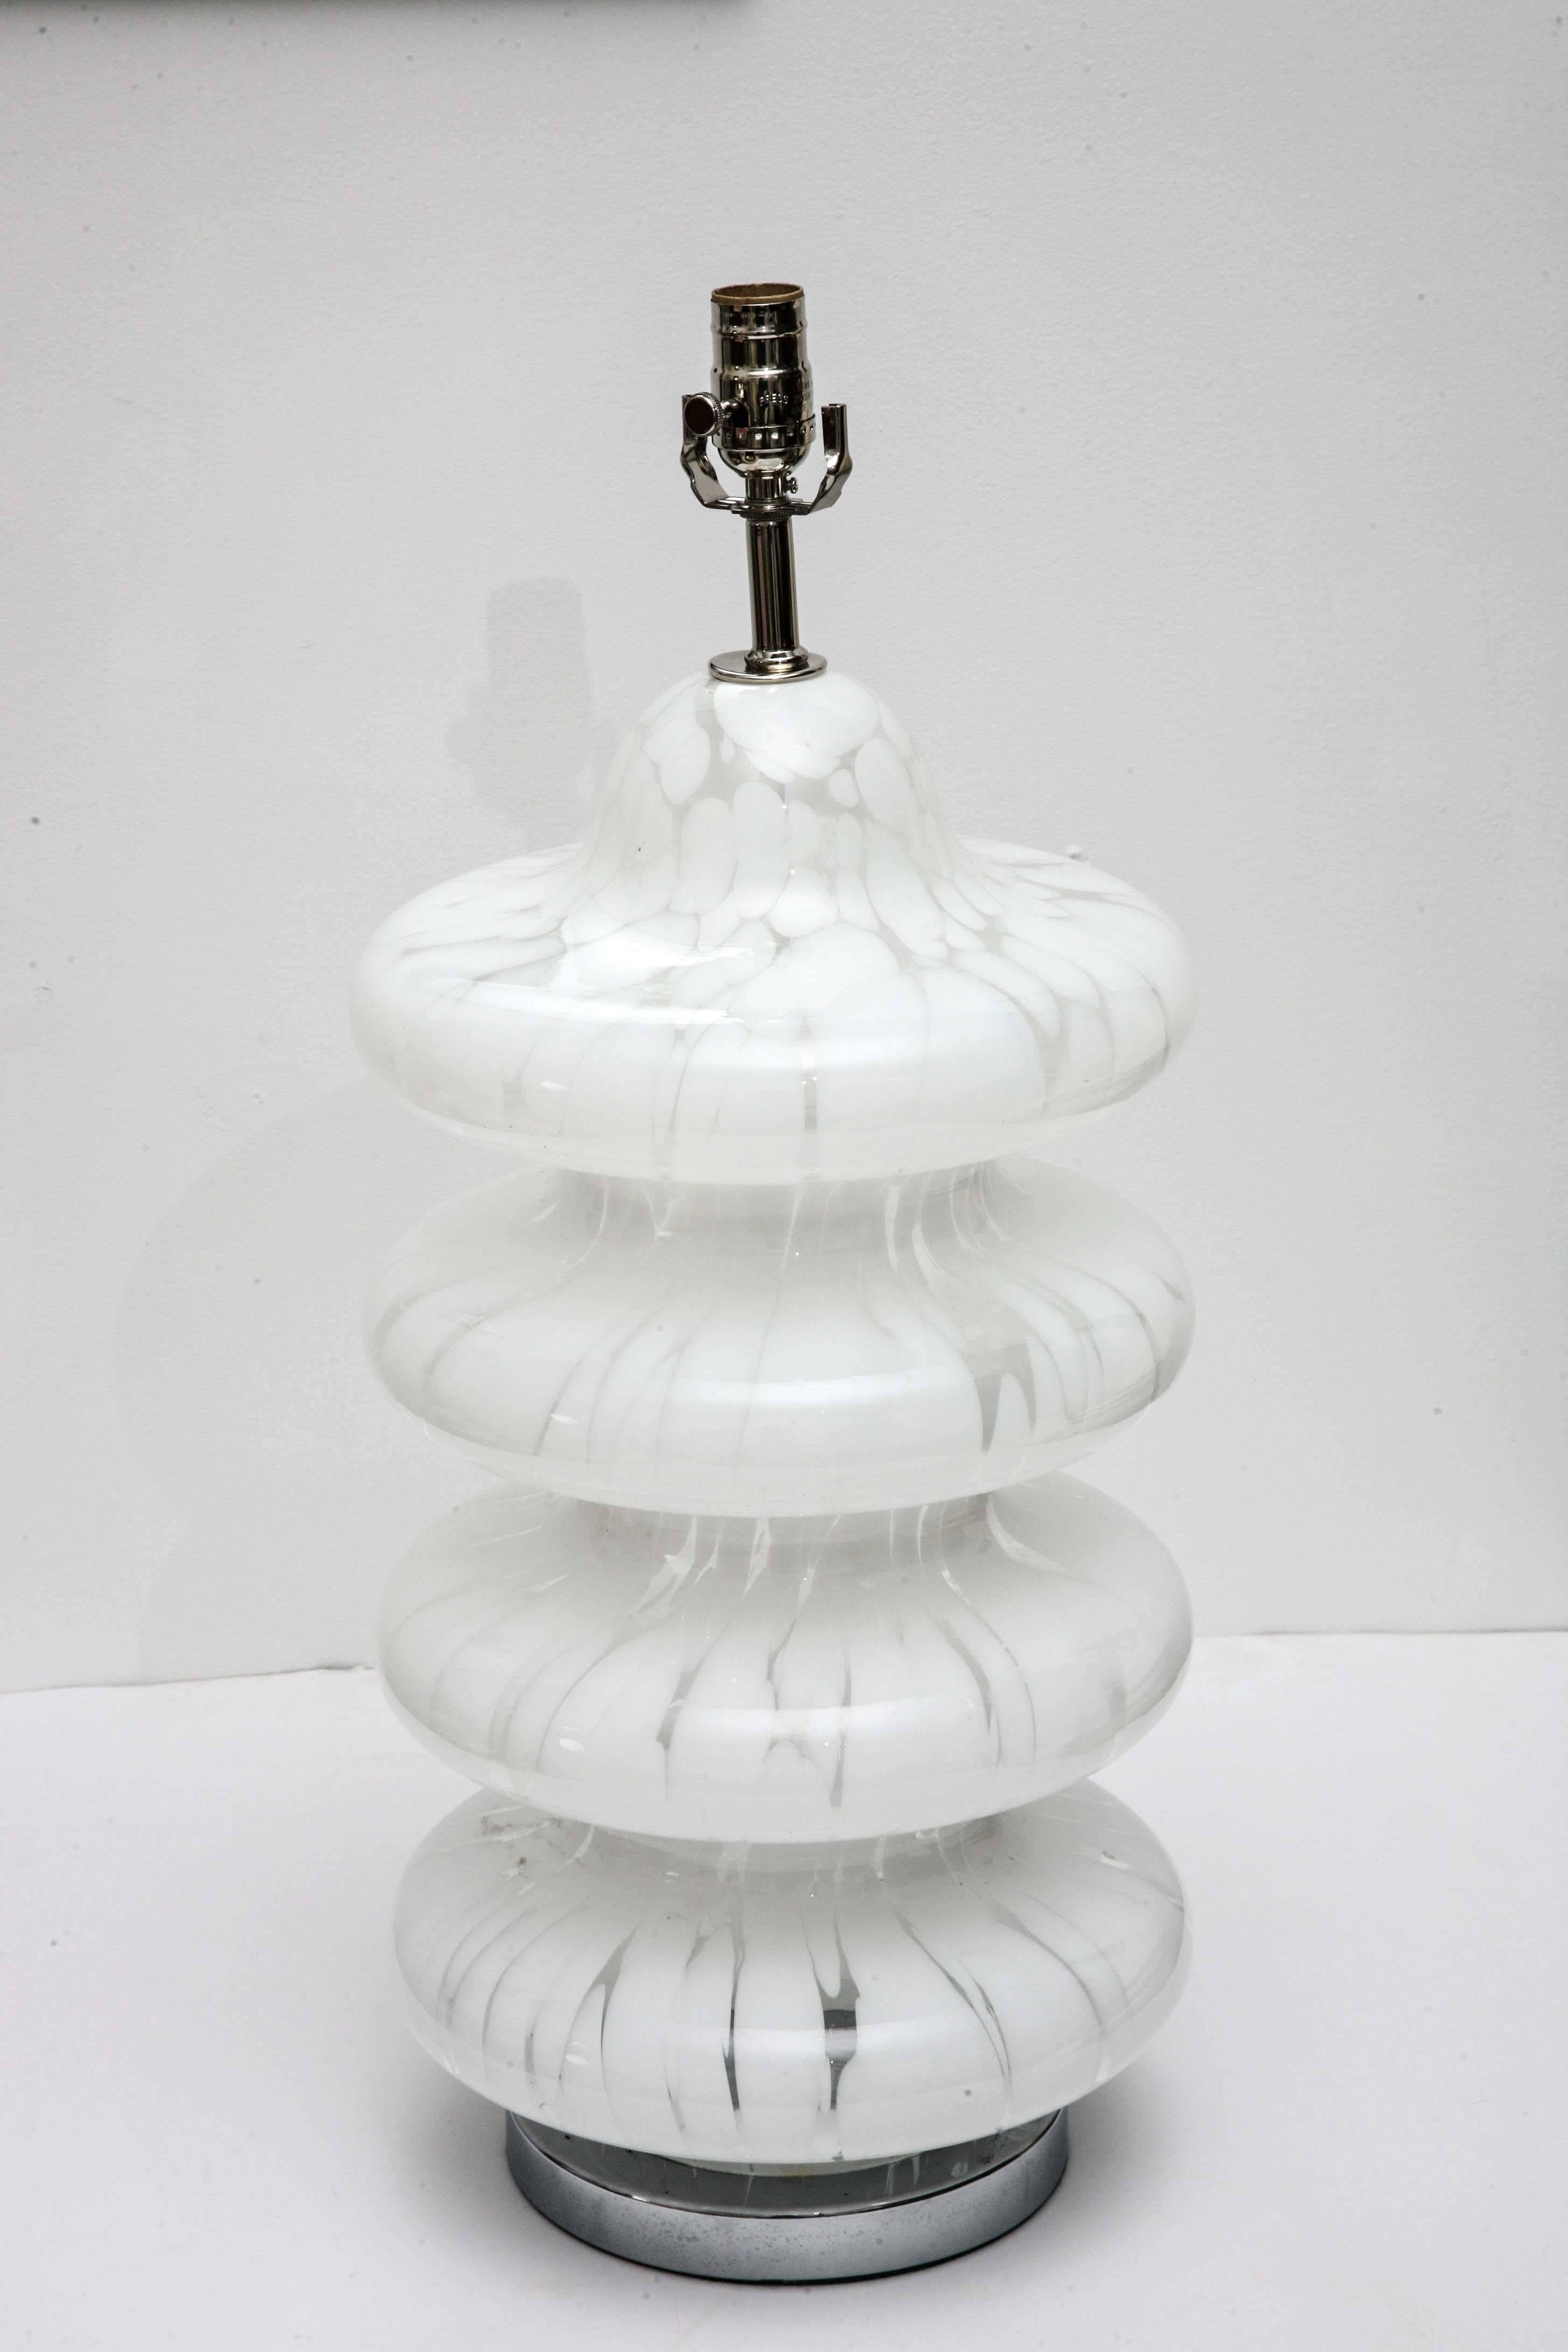 Pair of Murano glass lamps splattered white iconic design by Mazzega.